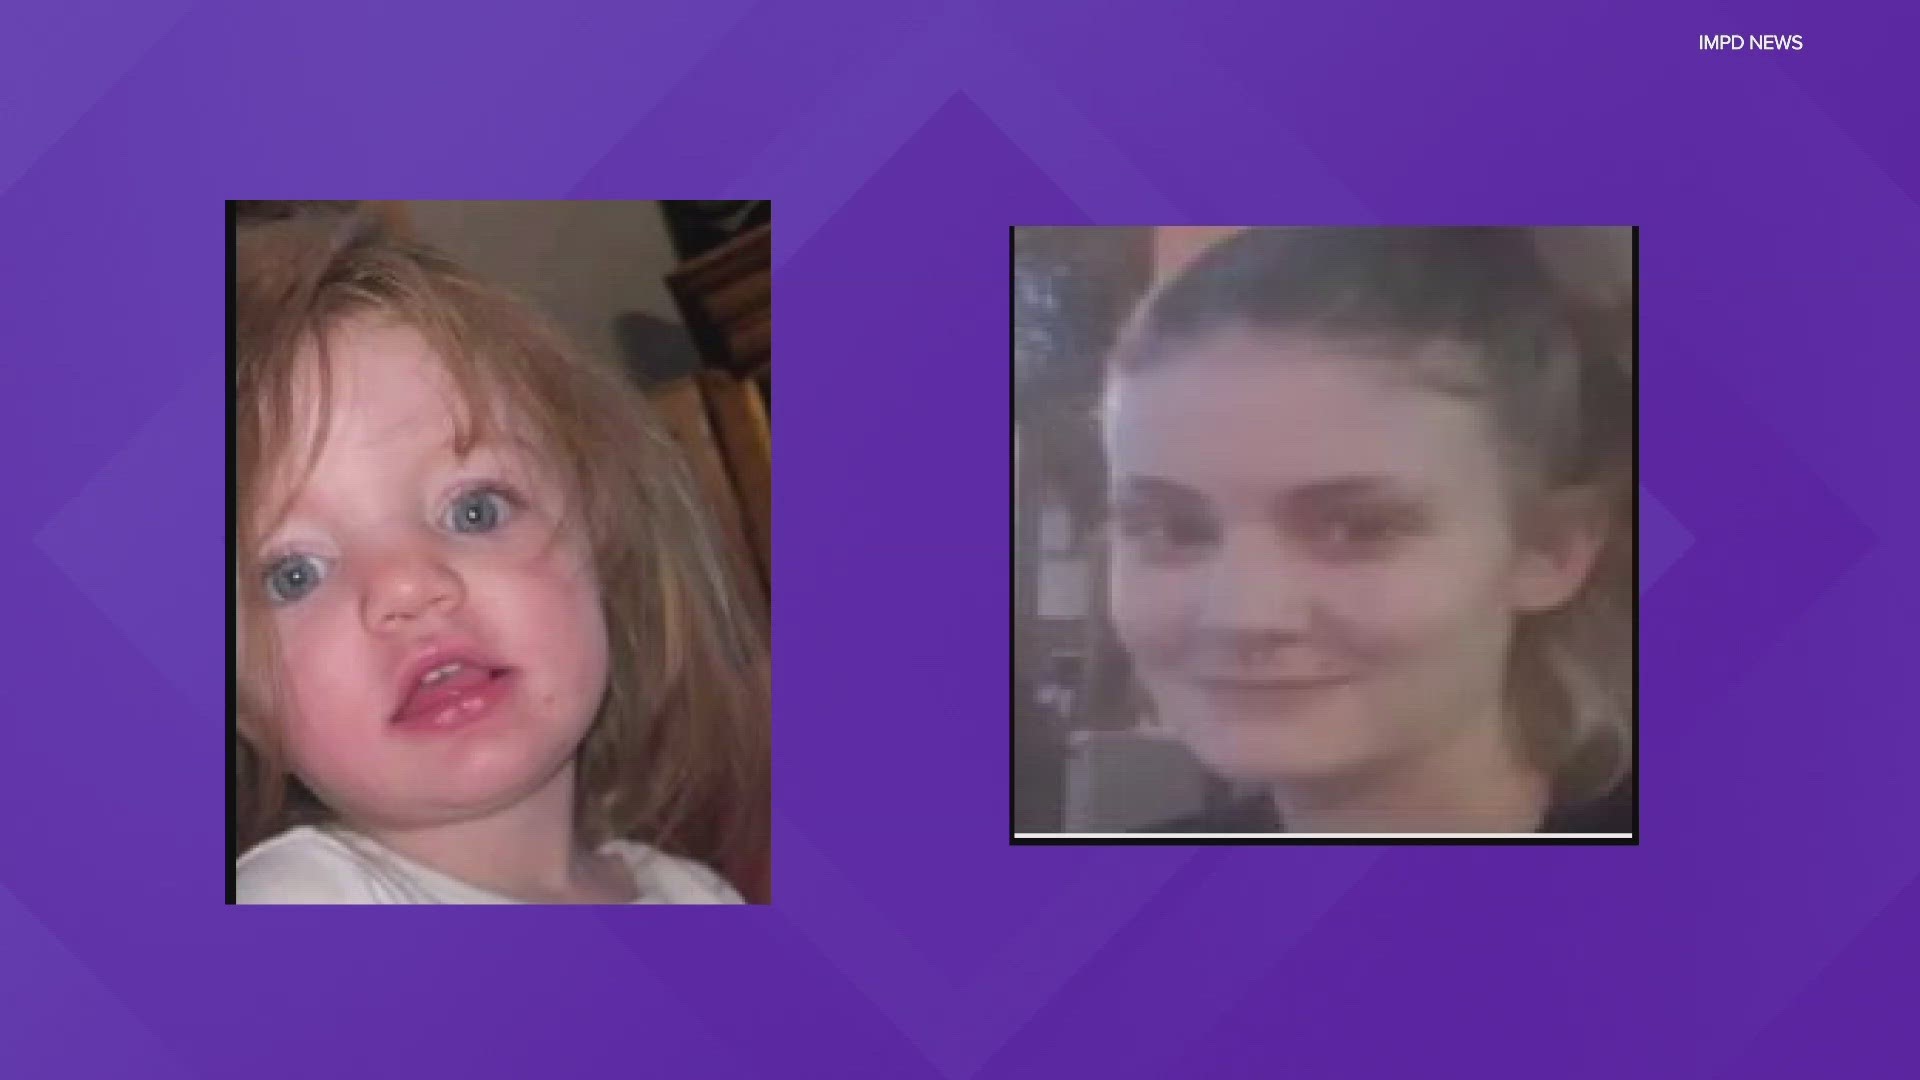 IMPD needs help finding a 2-year-old who may be in the Indianapolis area. She may be with her mother Madison Marshall.